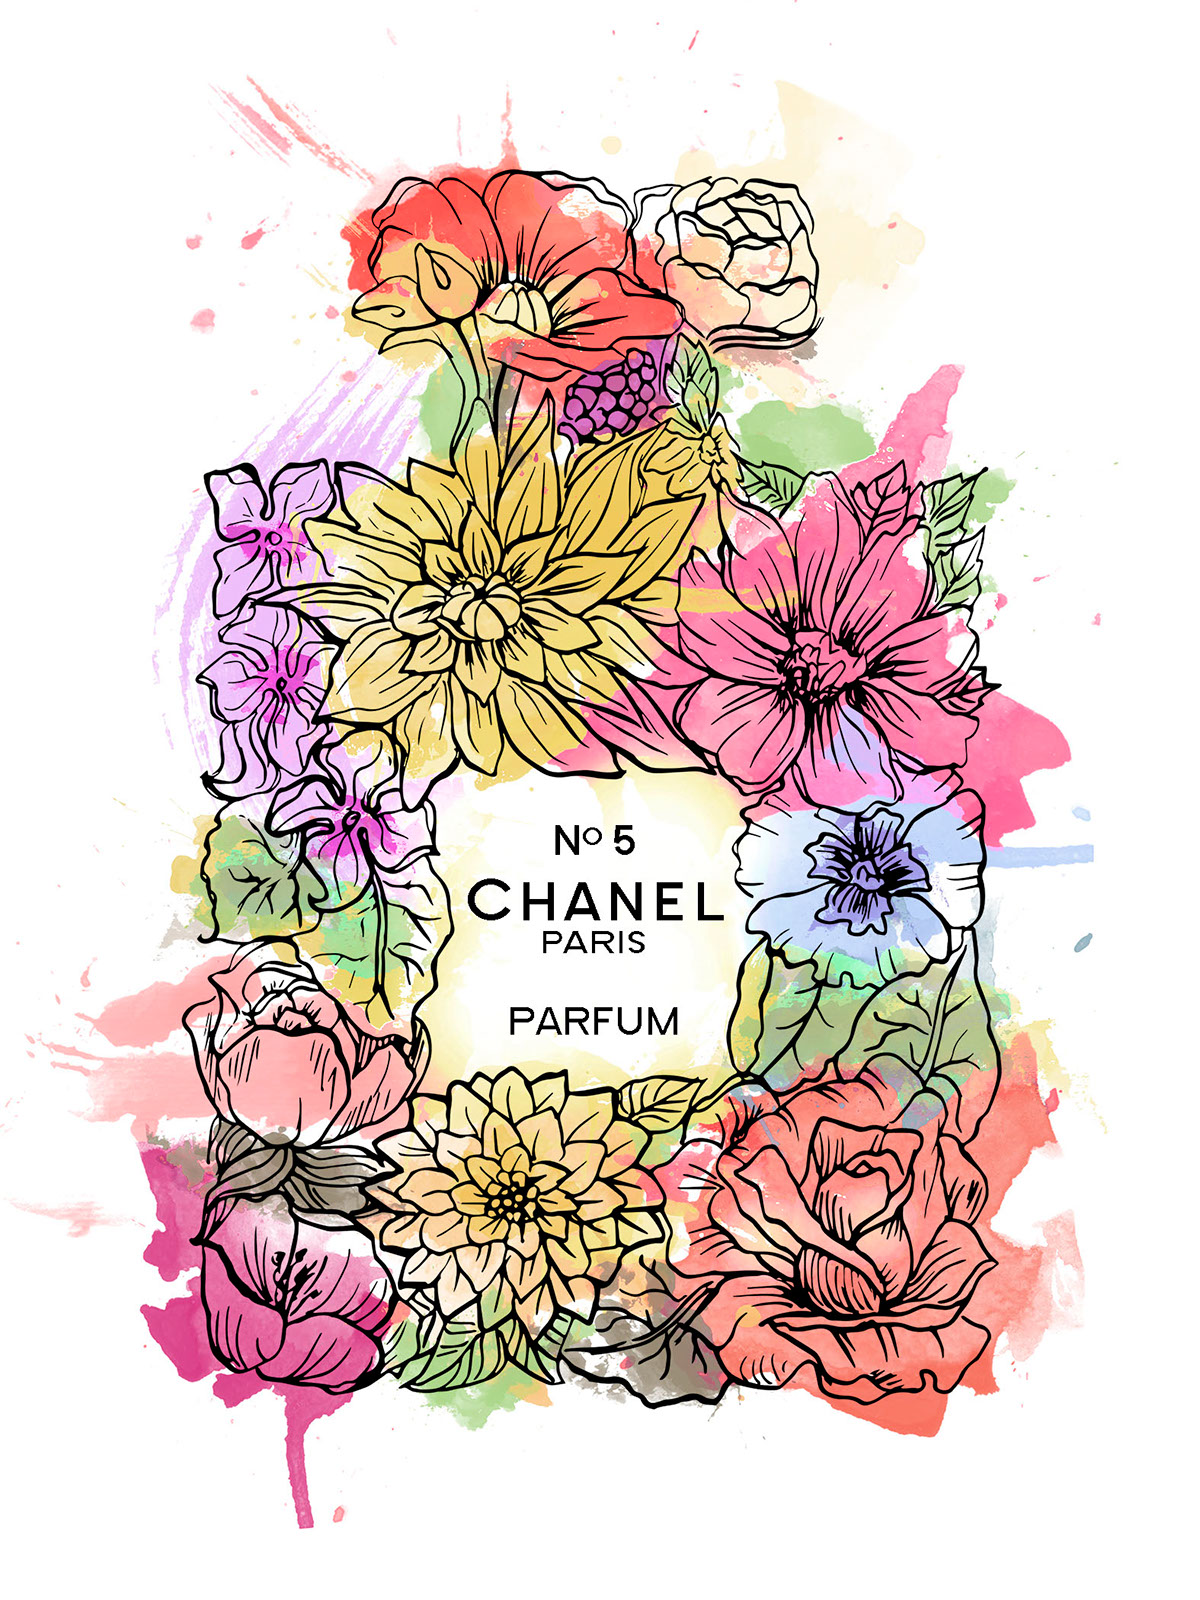 chanel poster illustration fashion illustration Promotional perfume advertisement Poster Design Botanicals watercolor Flowers florals floral pattern floral painting flower pattern digital painting